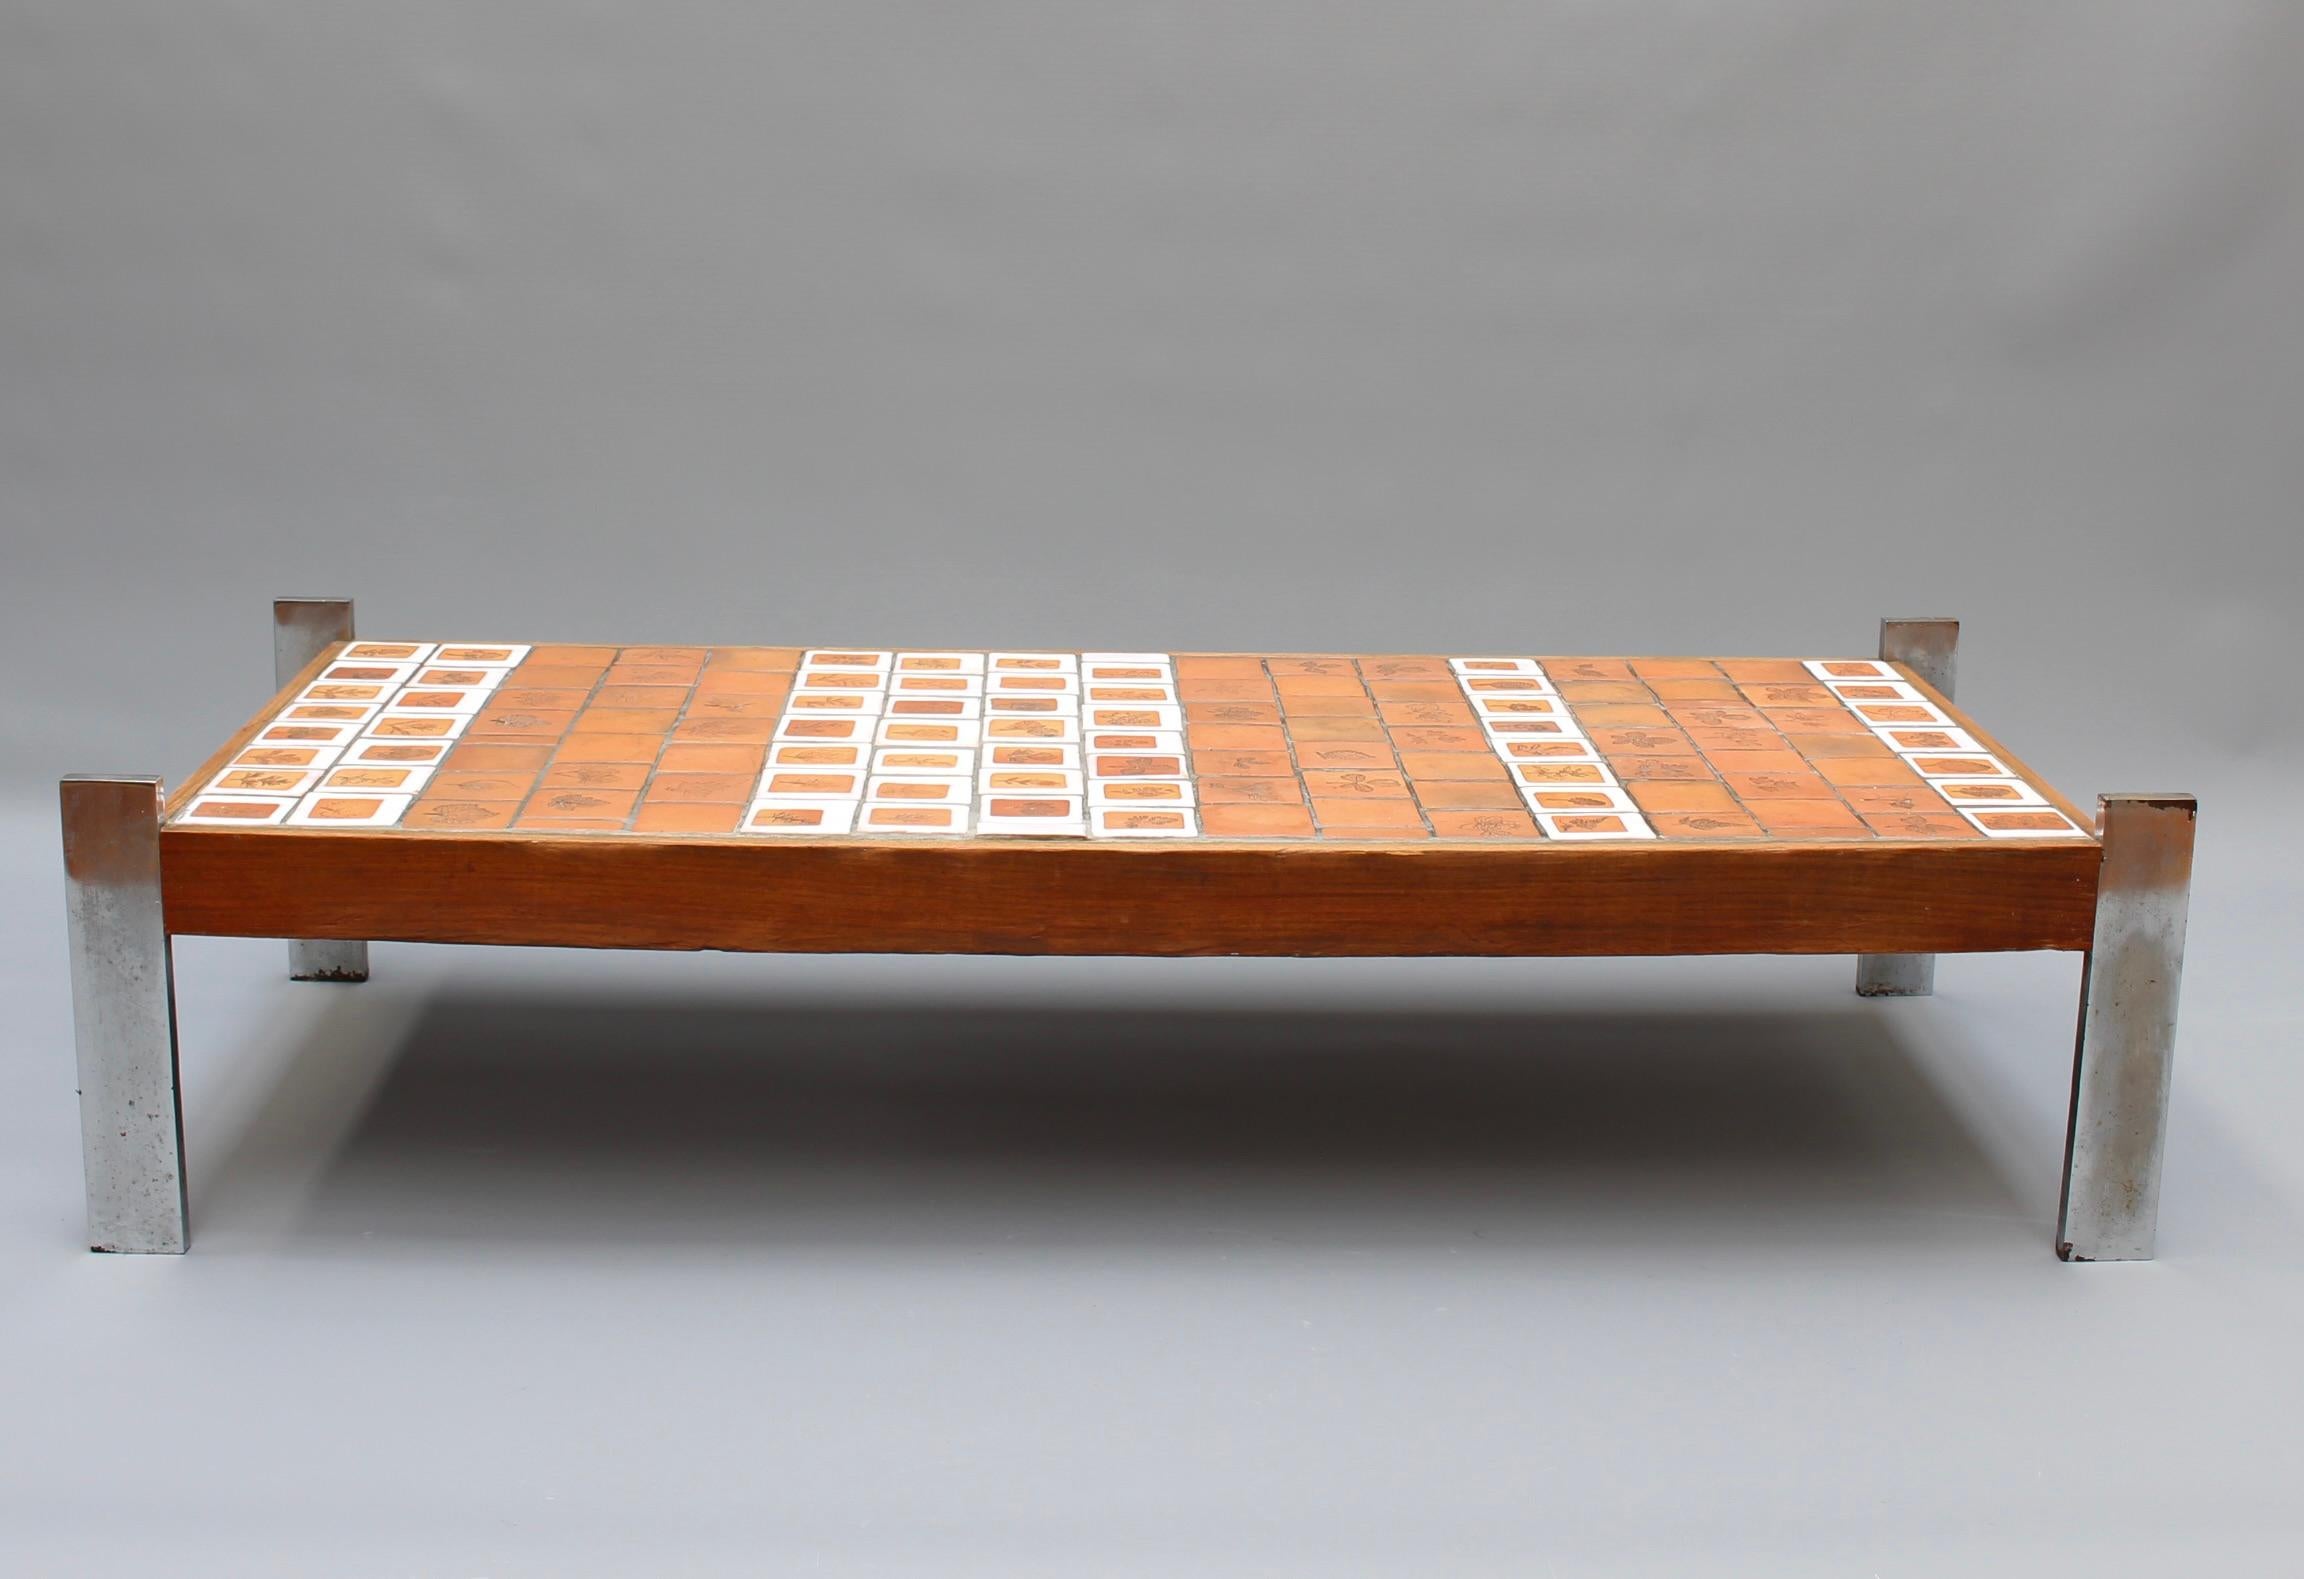 Coffee table with leaf motif earthenware tiles by Roger Capron (circa 1970s). This charming rectangular-shaped low table is a quintessential example of collectible Capron. There are nature-themed tiles with a multitude of beautiful leaves impressed